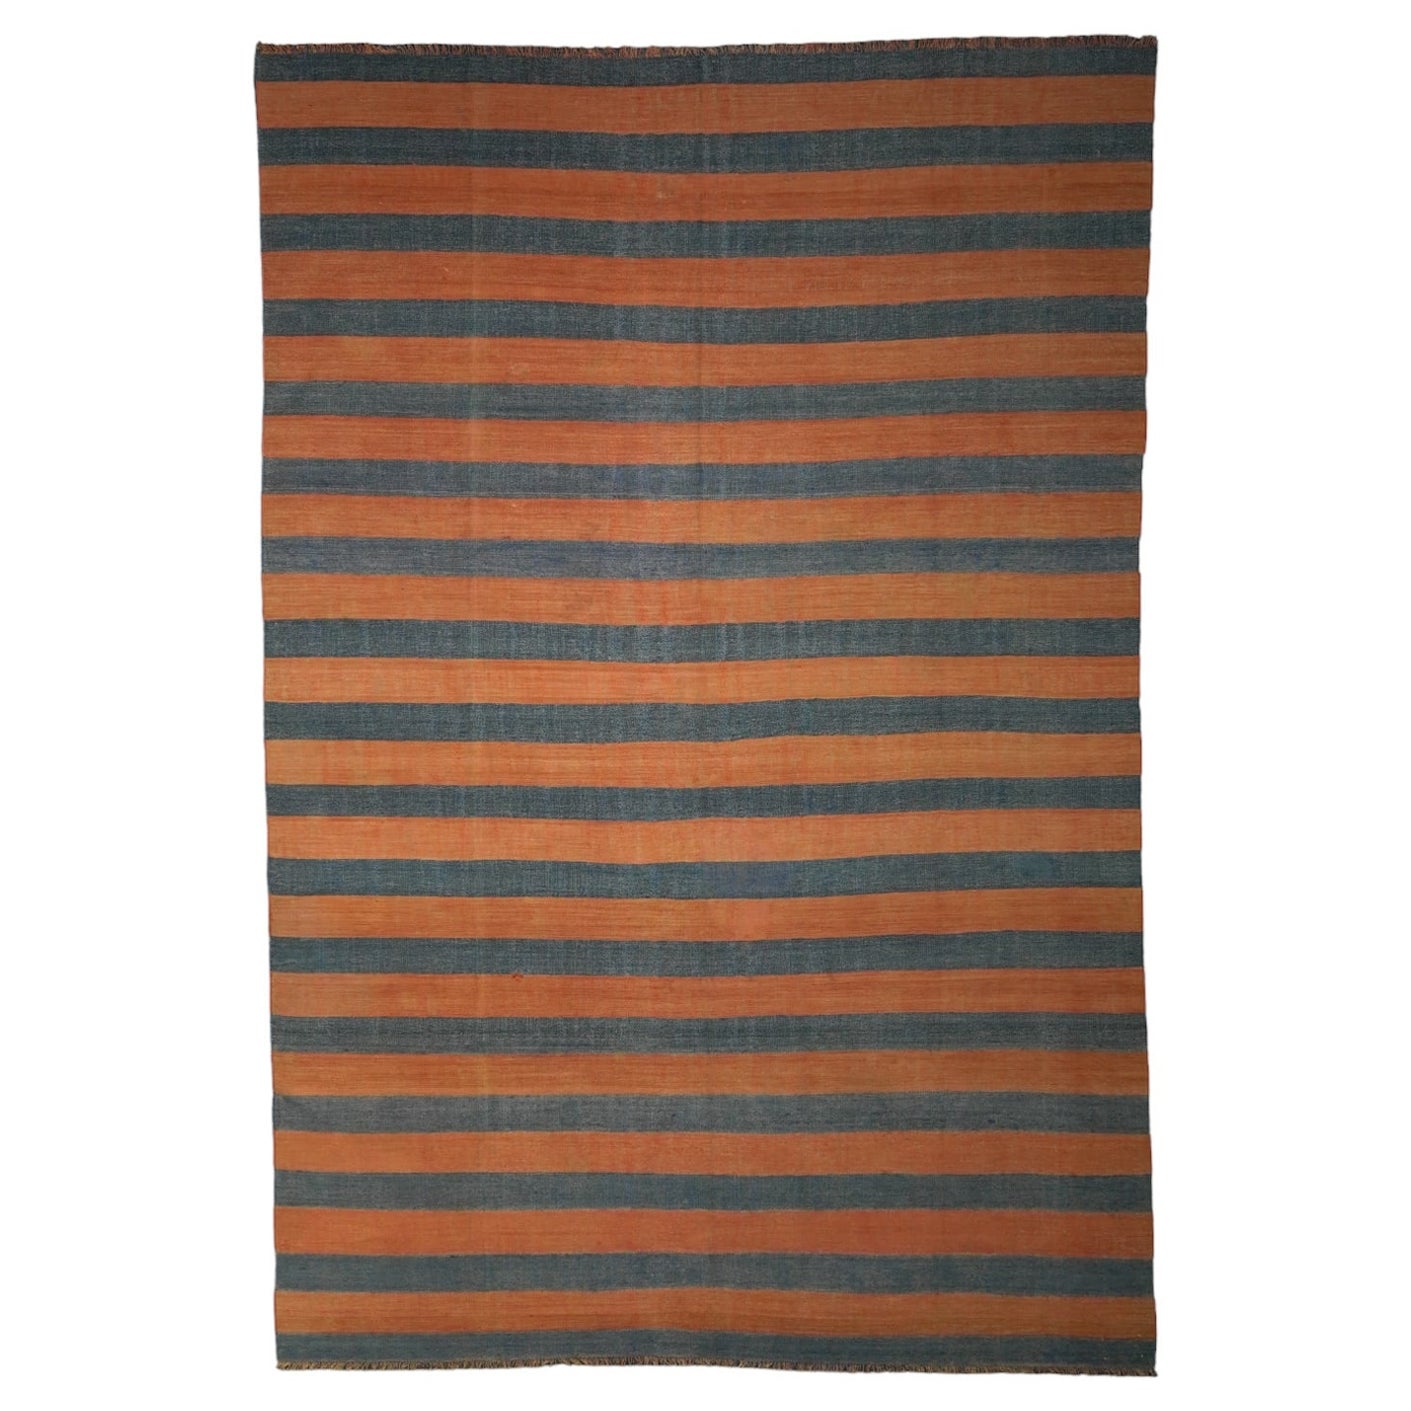 Vintage Dhurrie Rug, with Rust and Blue Stripes, from Rug & Kilim